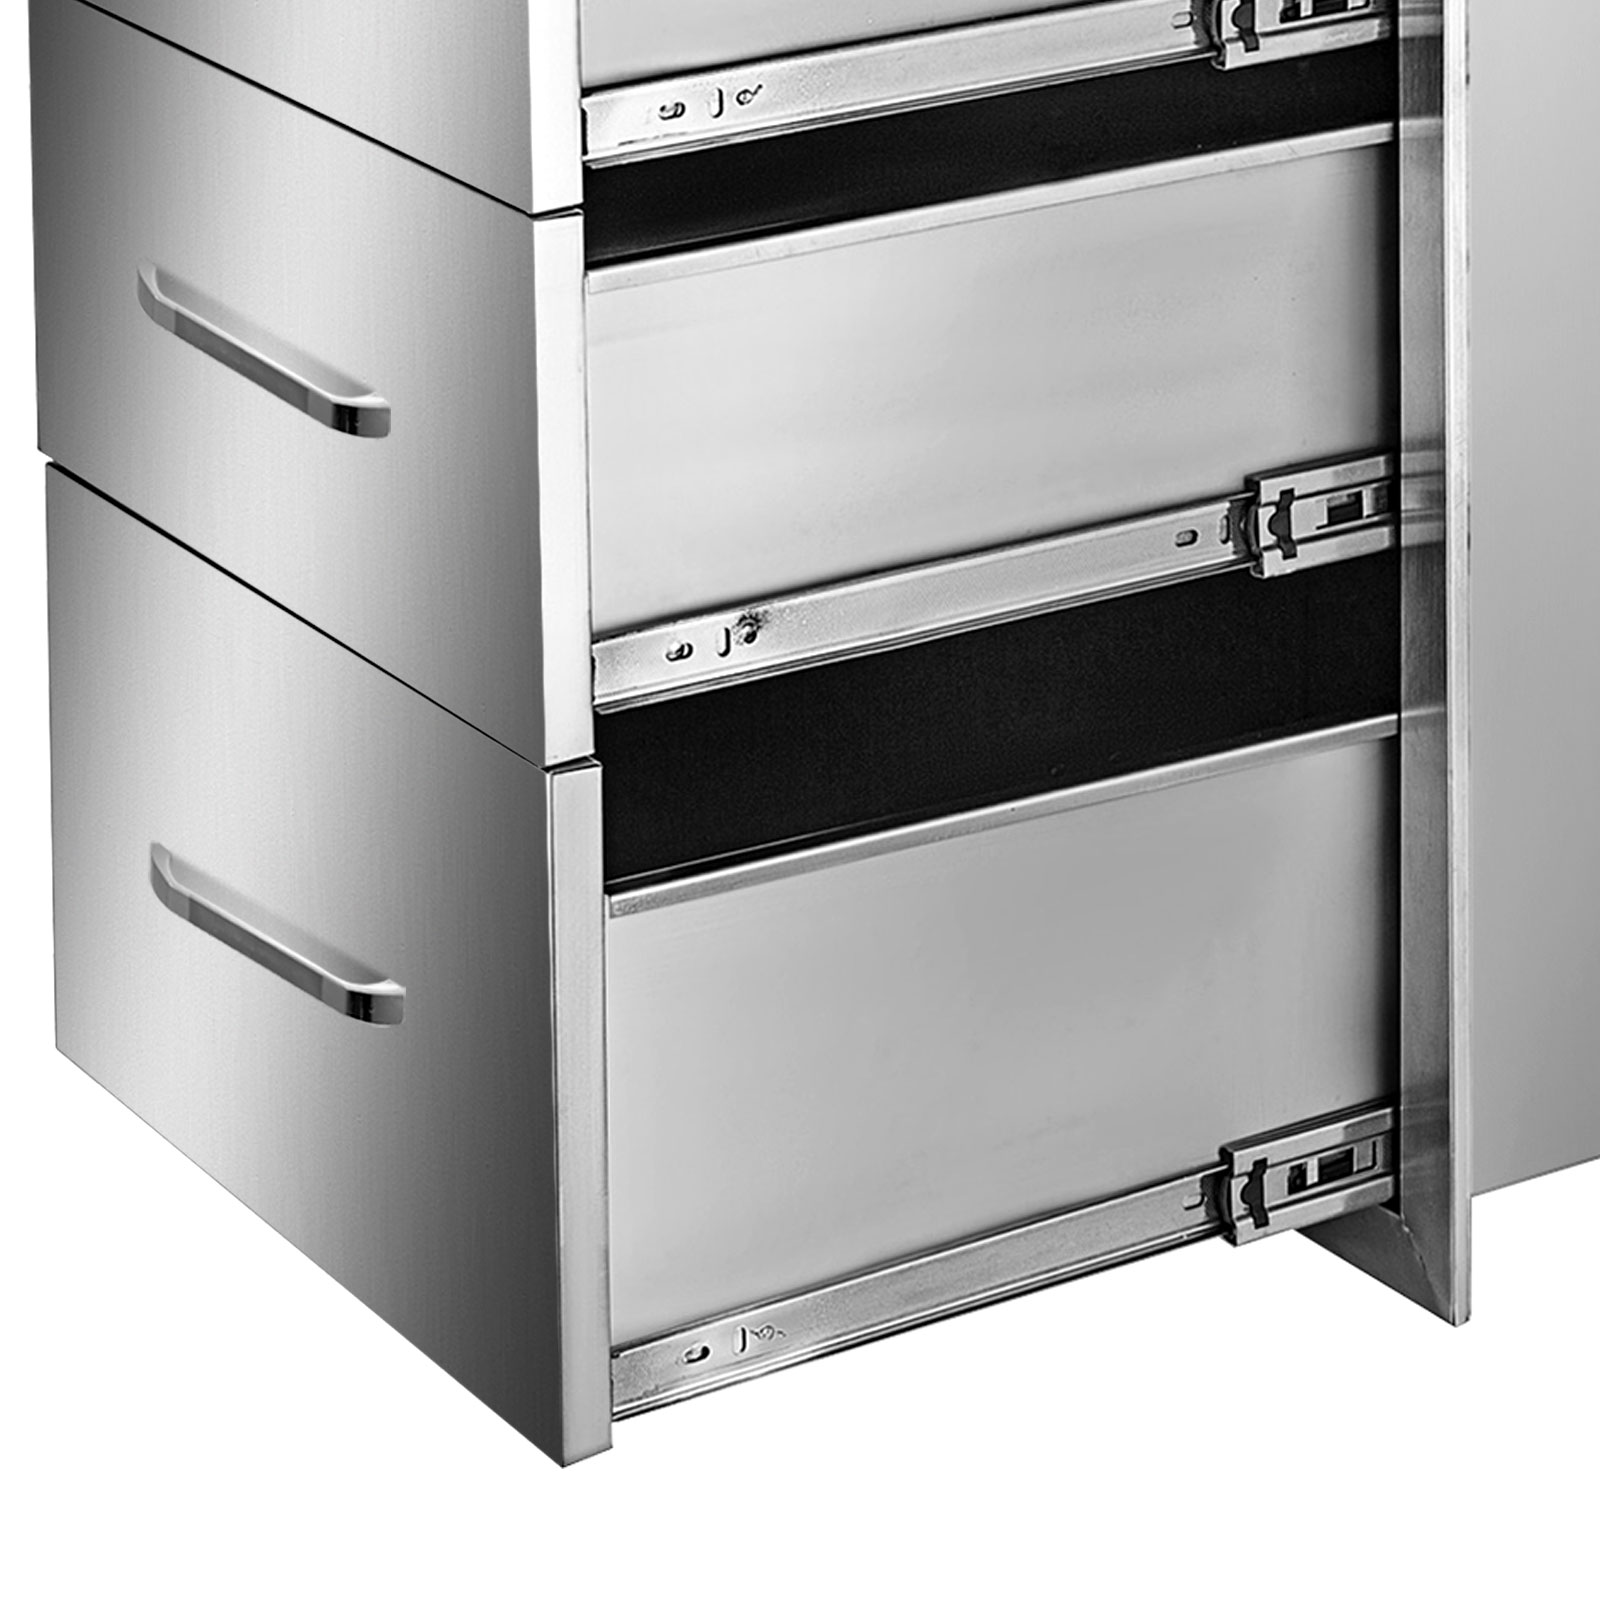 20.25"x14" BBQ Stainless Steel Triple Drawers Silver Outdoor Kitchen Stainless Steel Drawers For Outdoor Kitchens